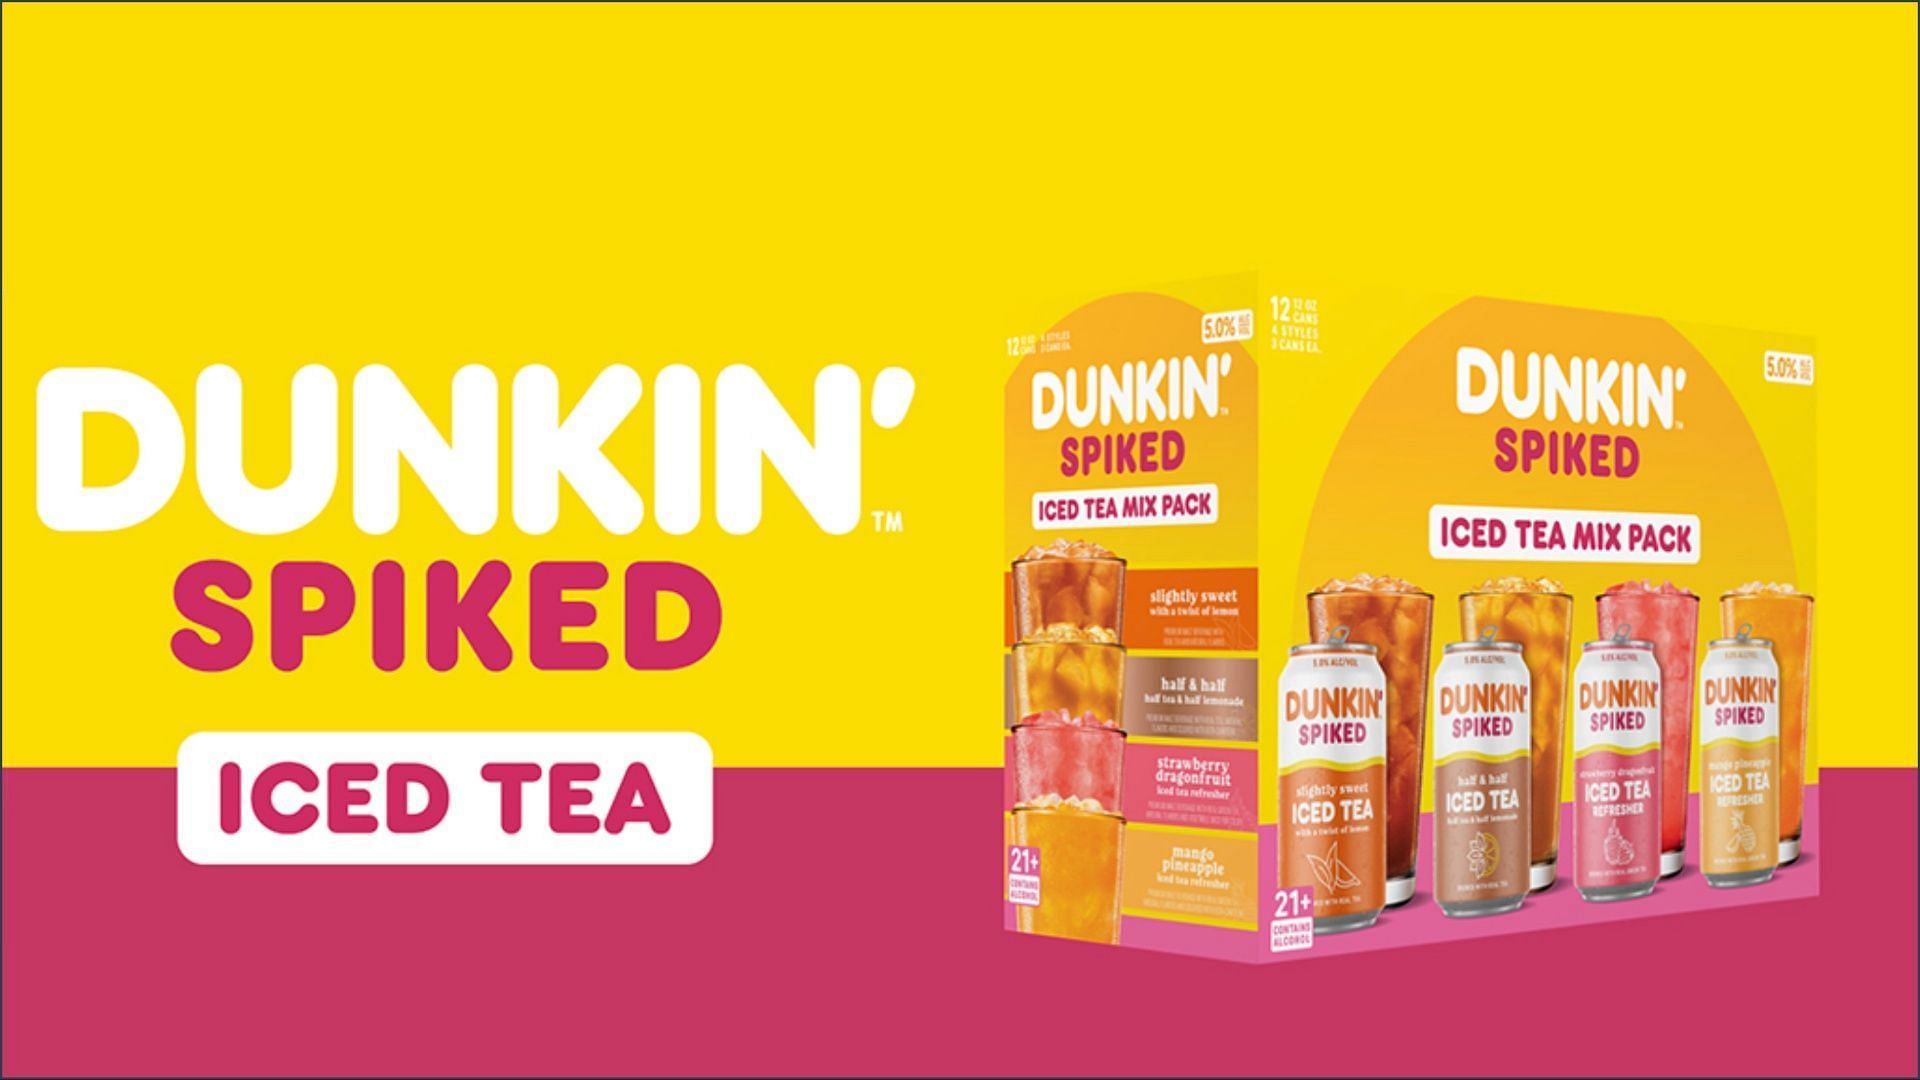 Dunkin&rsquo; Spiked coffee and tea beverages are expected to be available in single-flavor and variety packs after launch (Image via Dunkin&rsquo;)